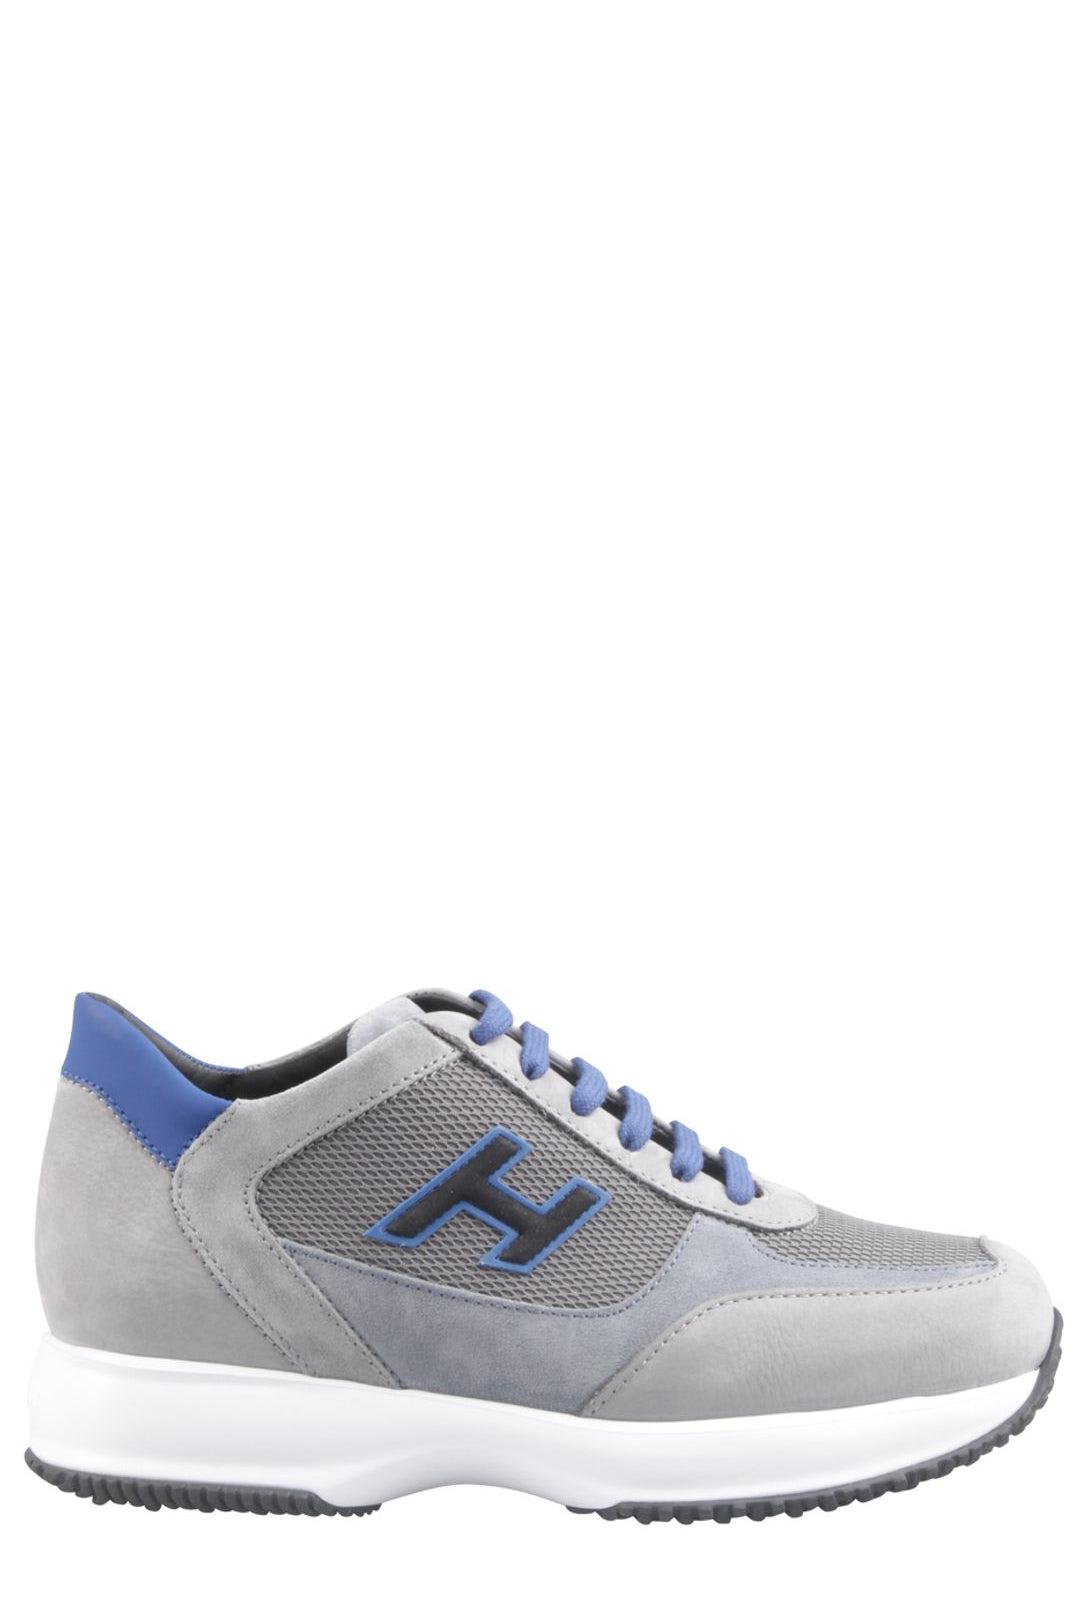 Hogan Logo Detailed Lace-up Sneakers